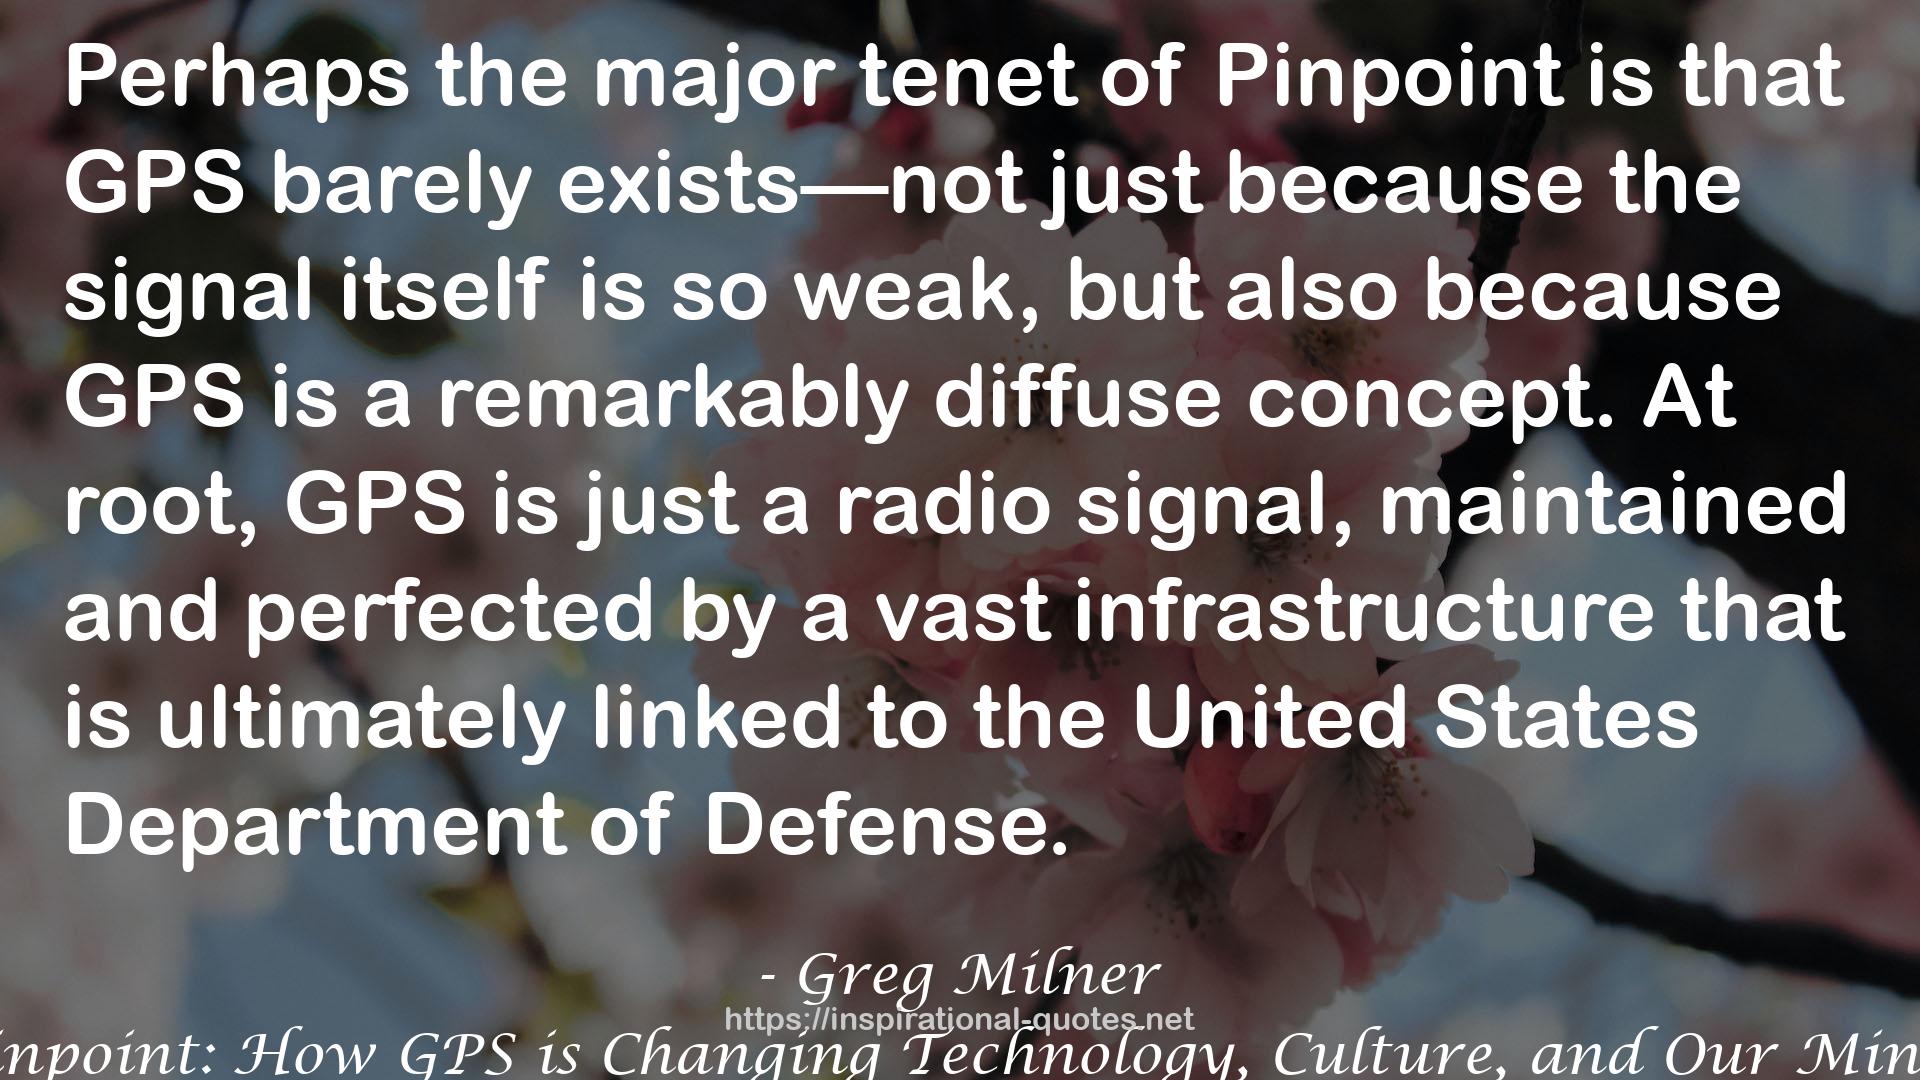 Pinpoint: How GPS is Changing Technology, Culture, and Our Minds QUOTES